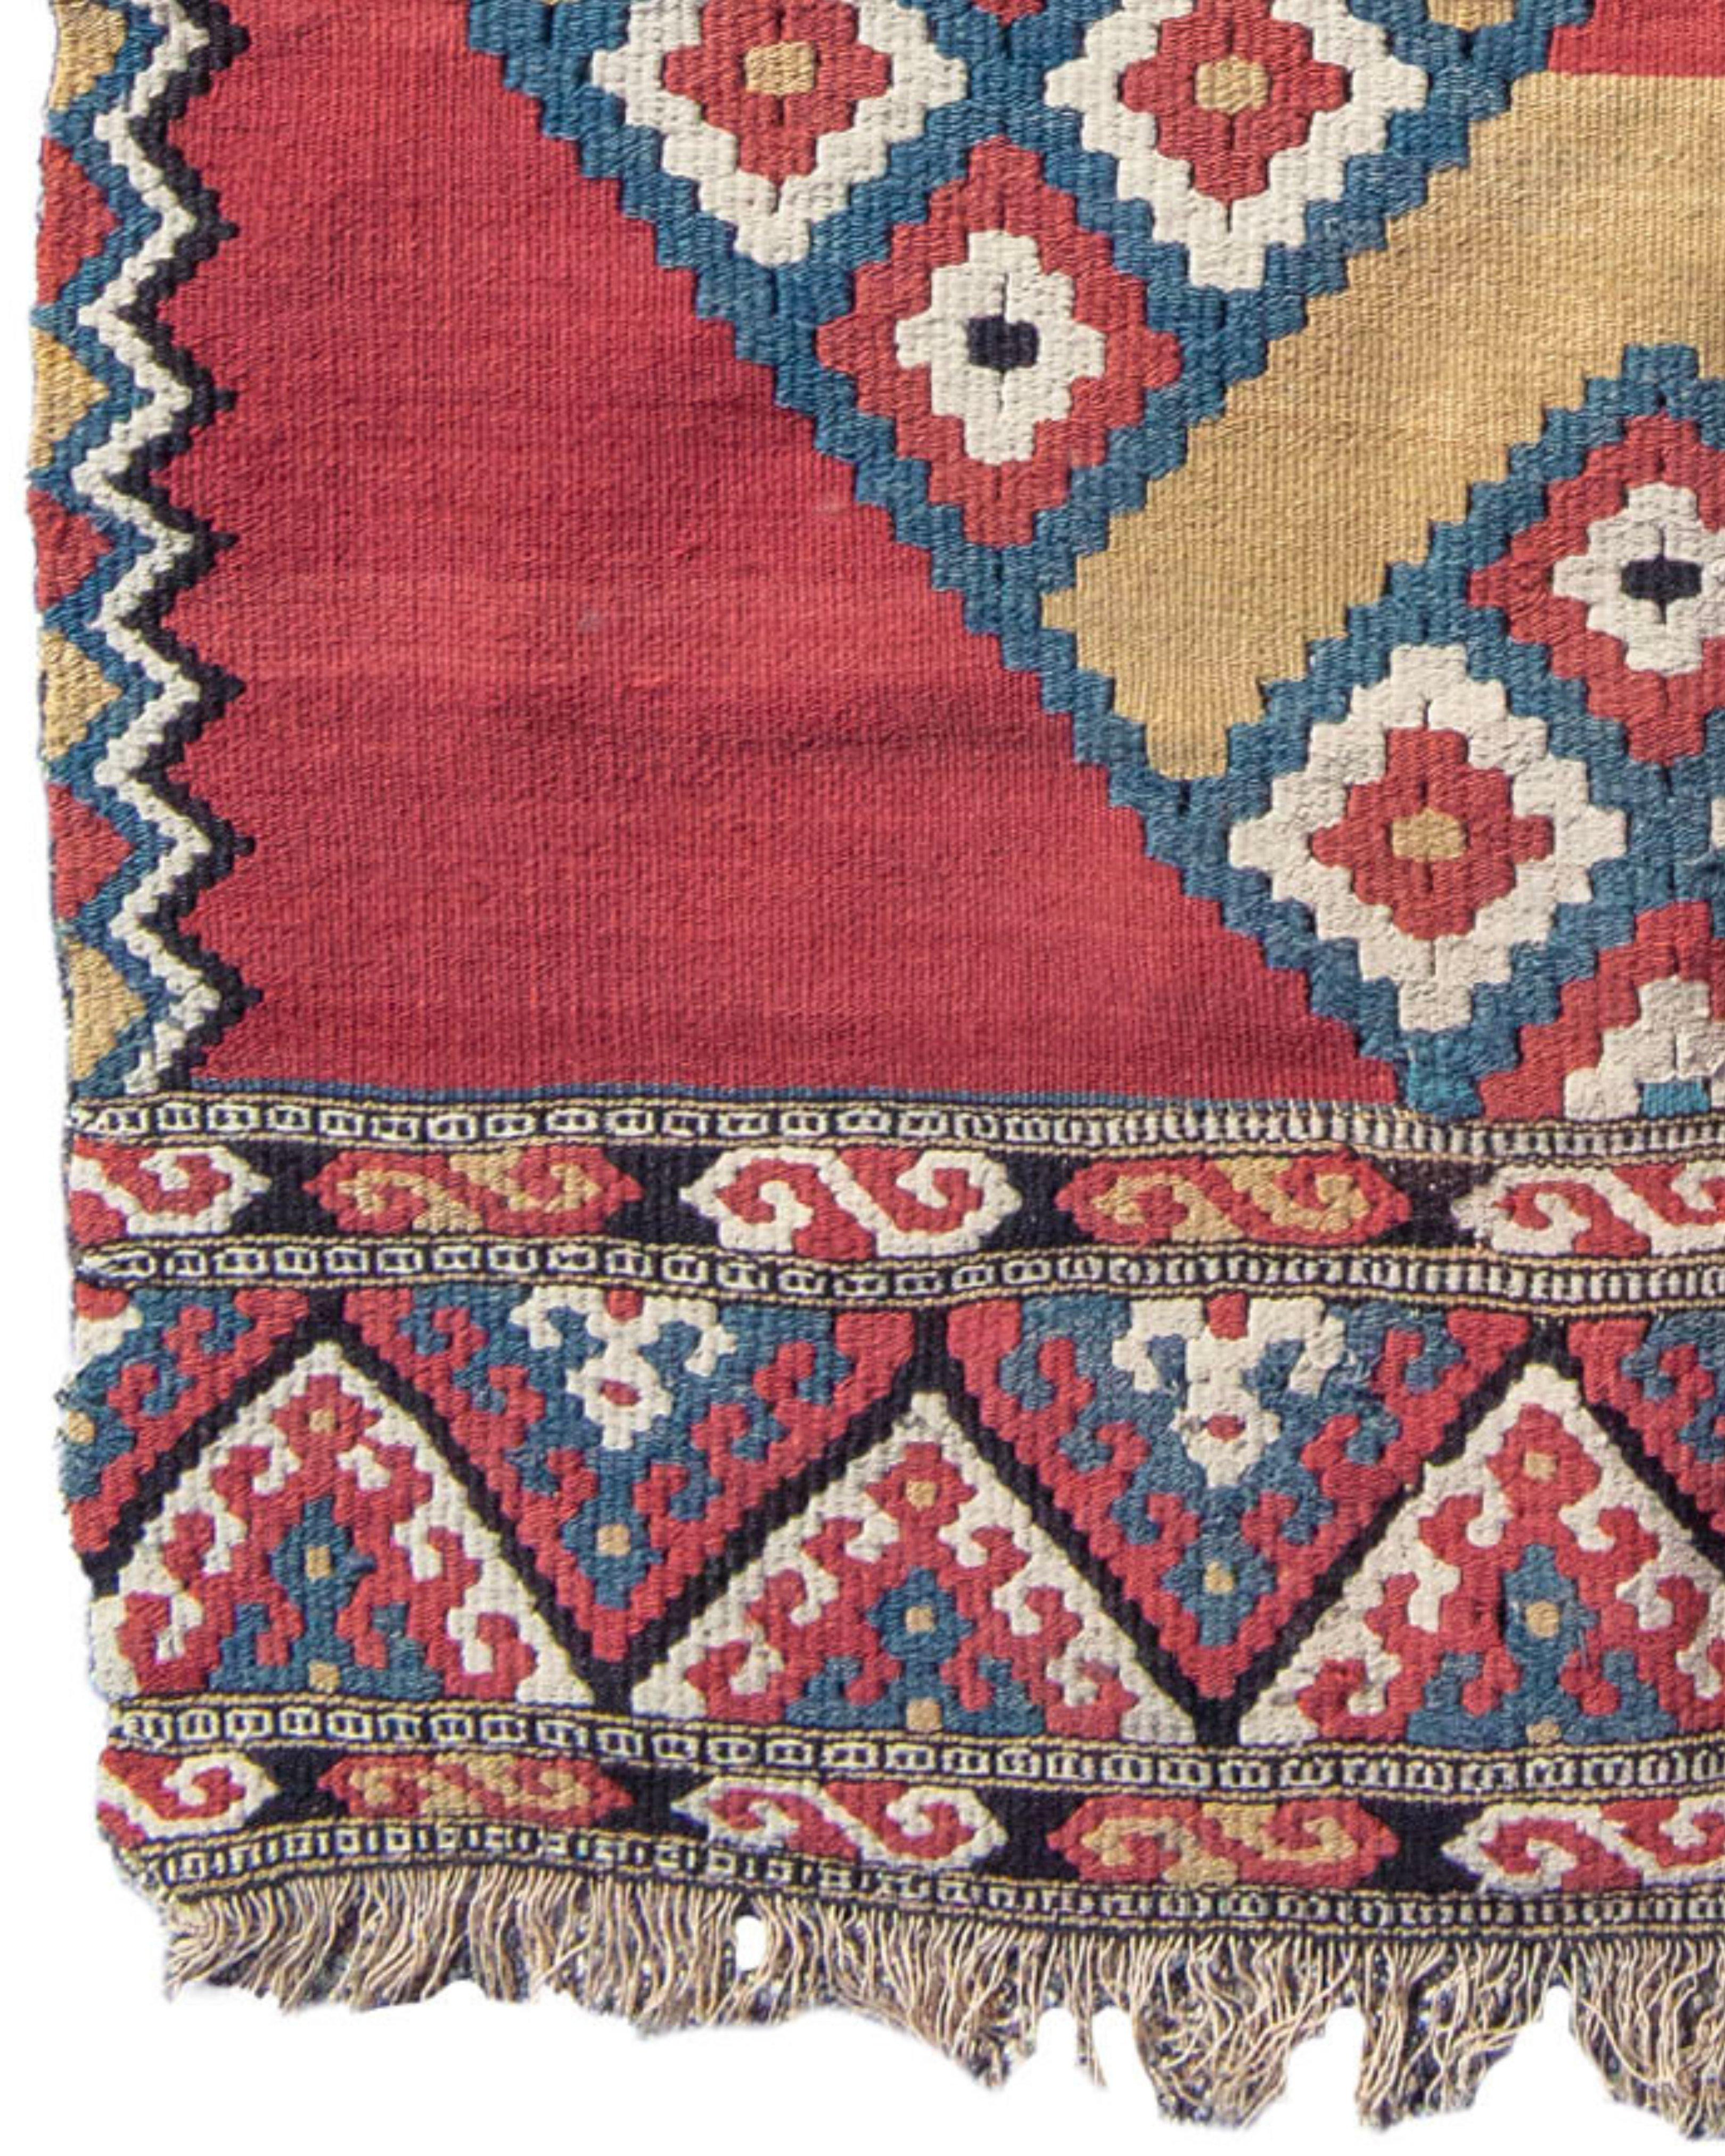 Antique Turkish Manastir Kilim Rug, Late 19th century In Excellent Condition For Sale In San Francisco, CA